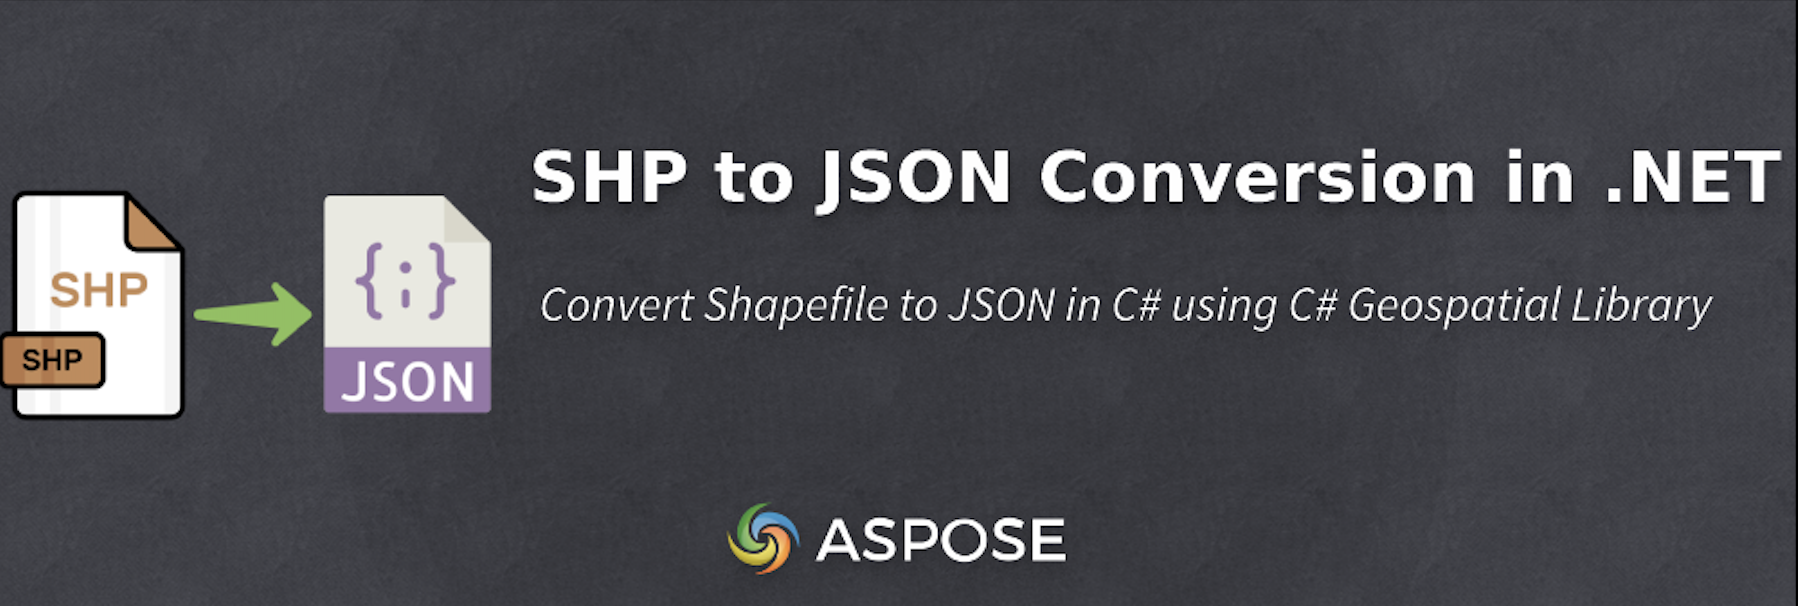 Convert Shapefile to JSON in C# using C# Geospatial Library